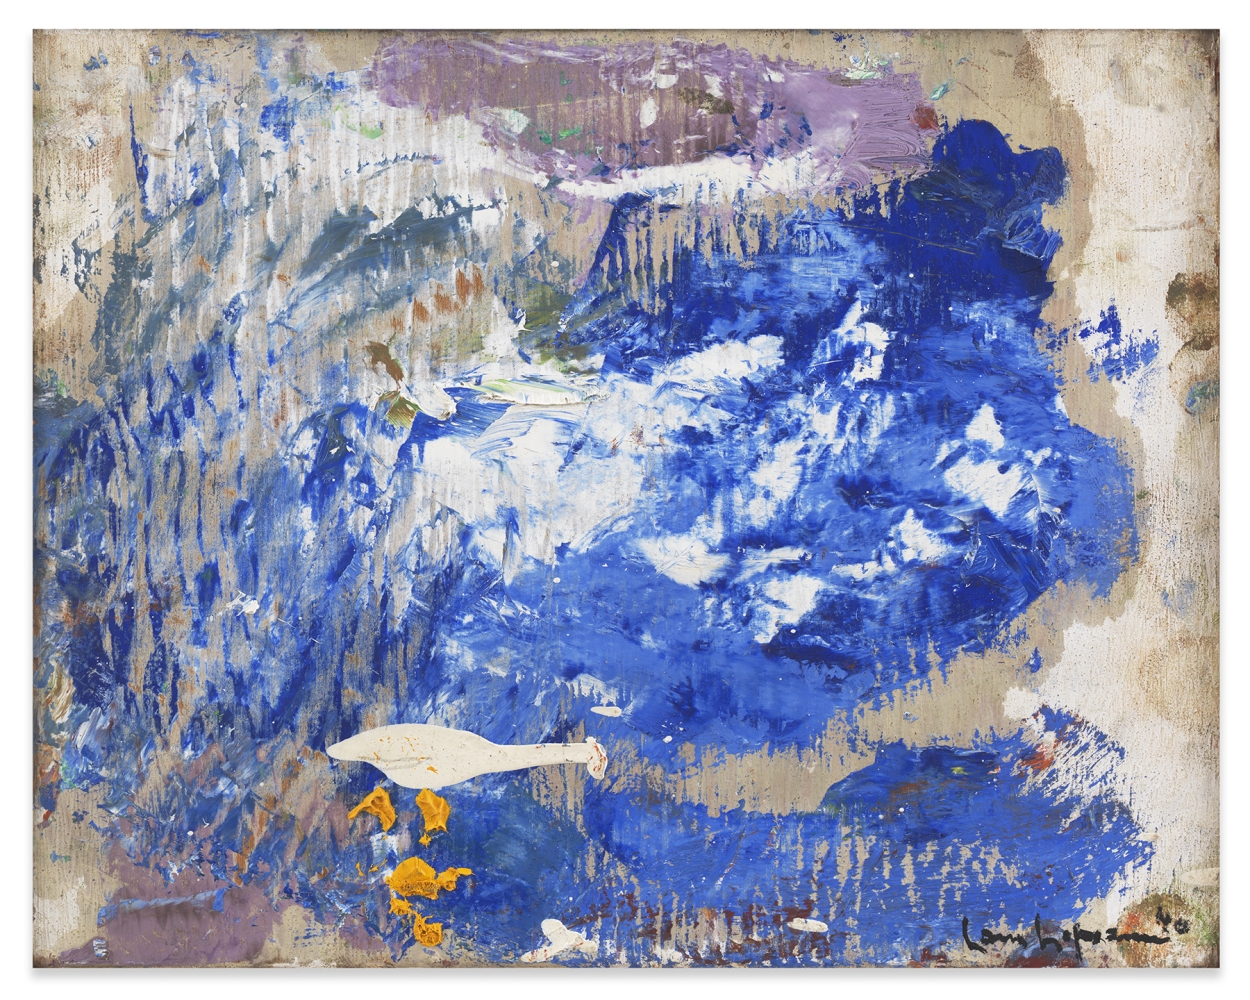 Hans Hofmann

Submerged, 1940

Oil on panel

7 3/4h x 9 3/4w in

HH040